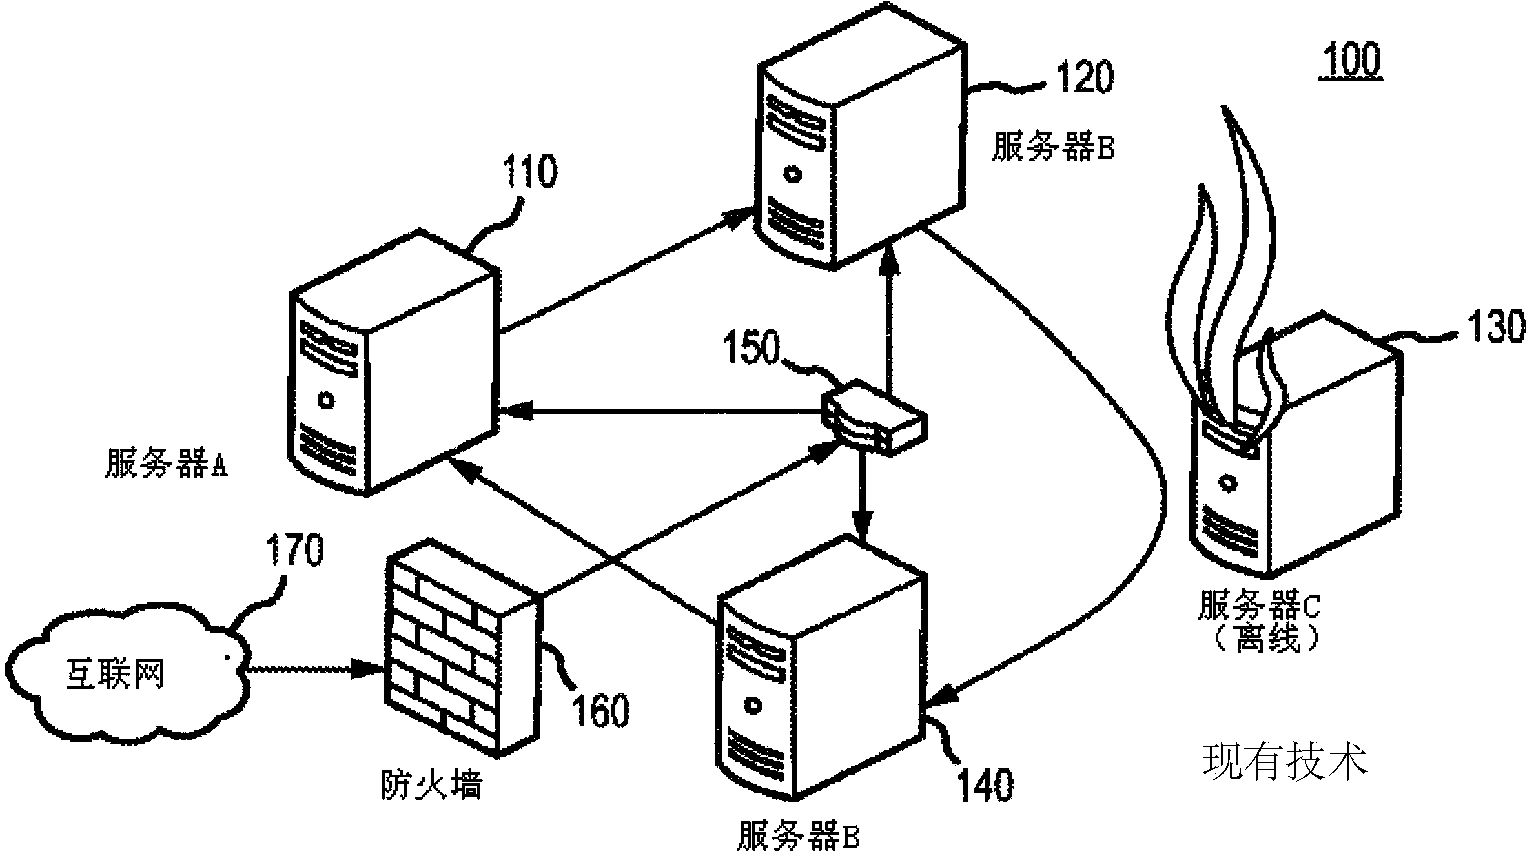 Systems and methods for server cluster application virtualization